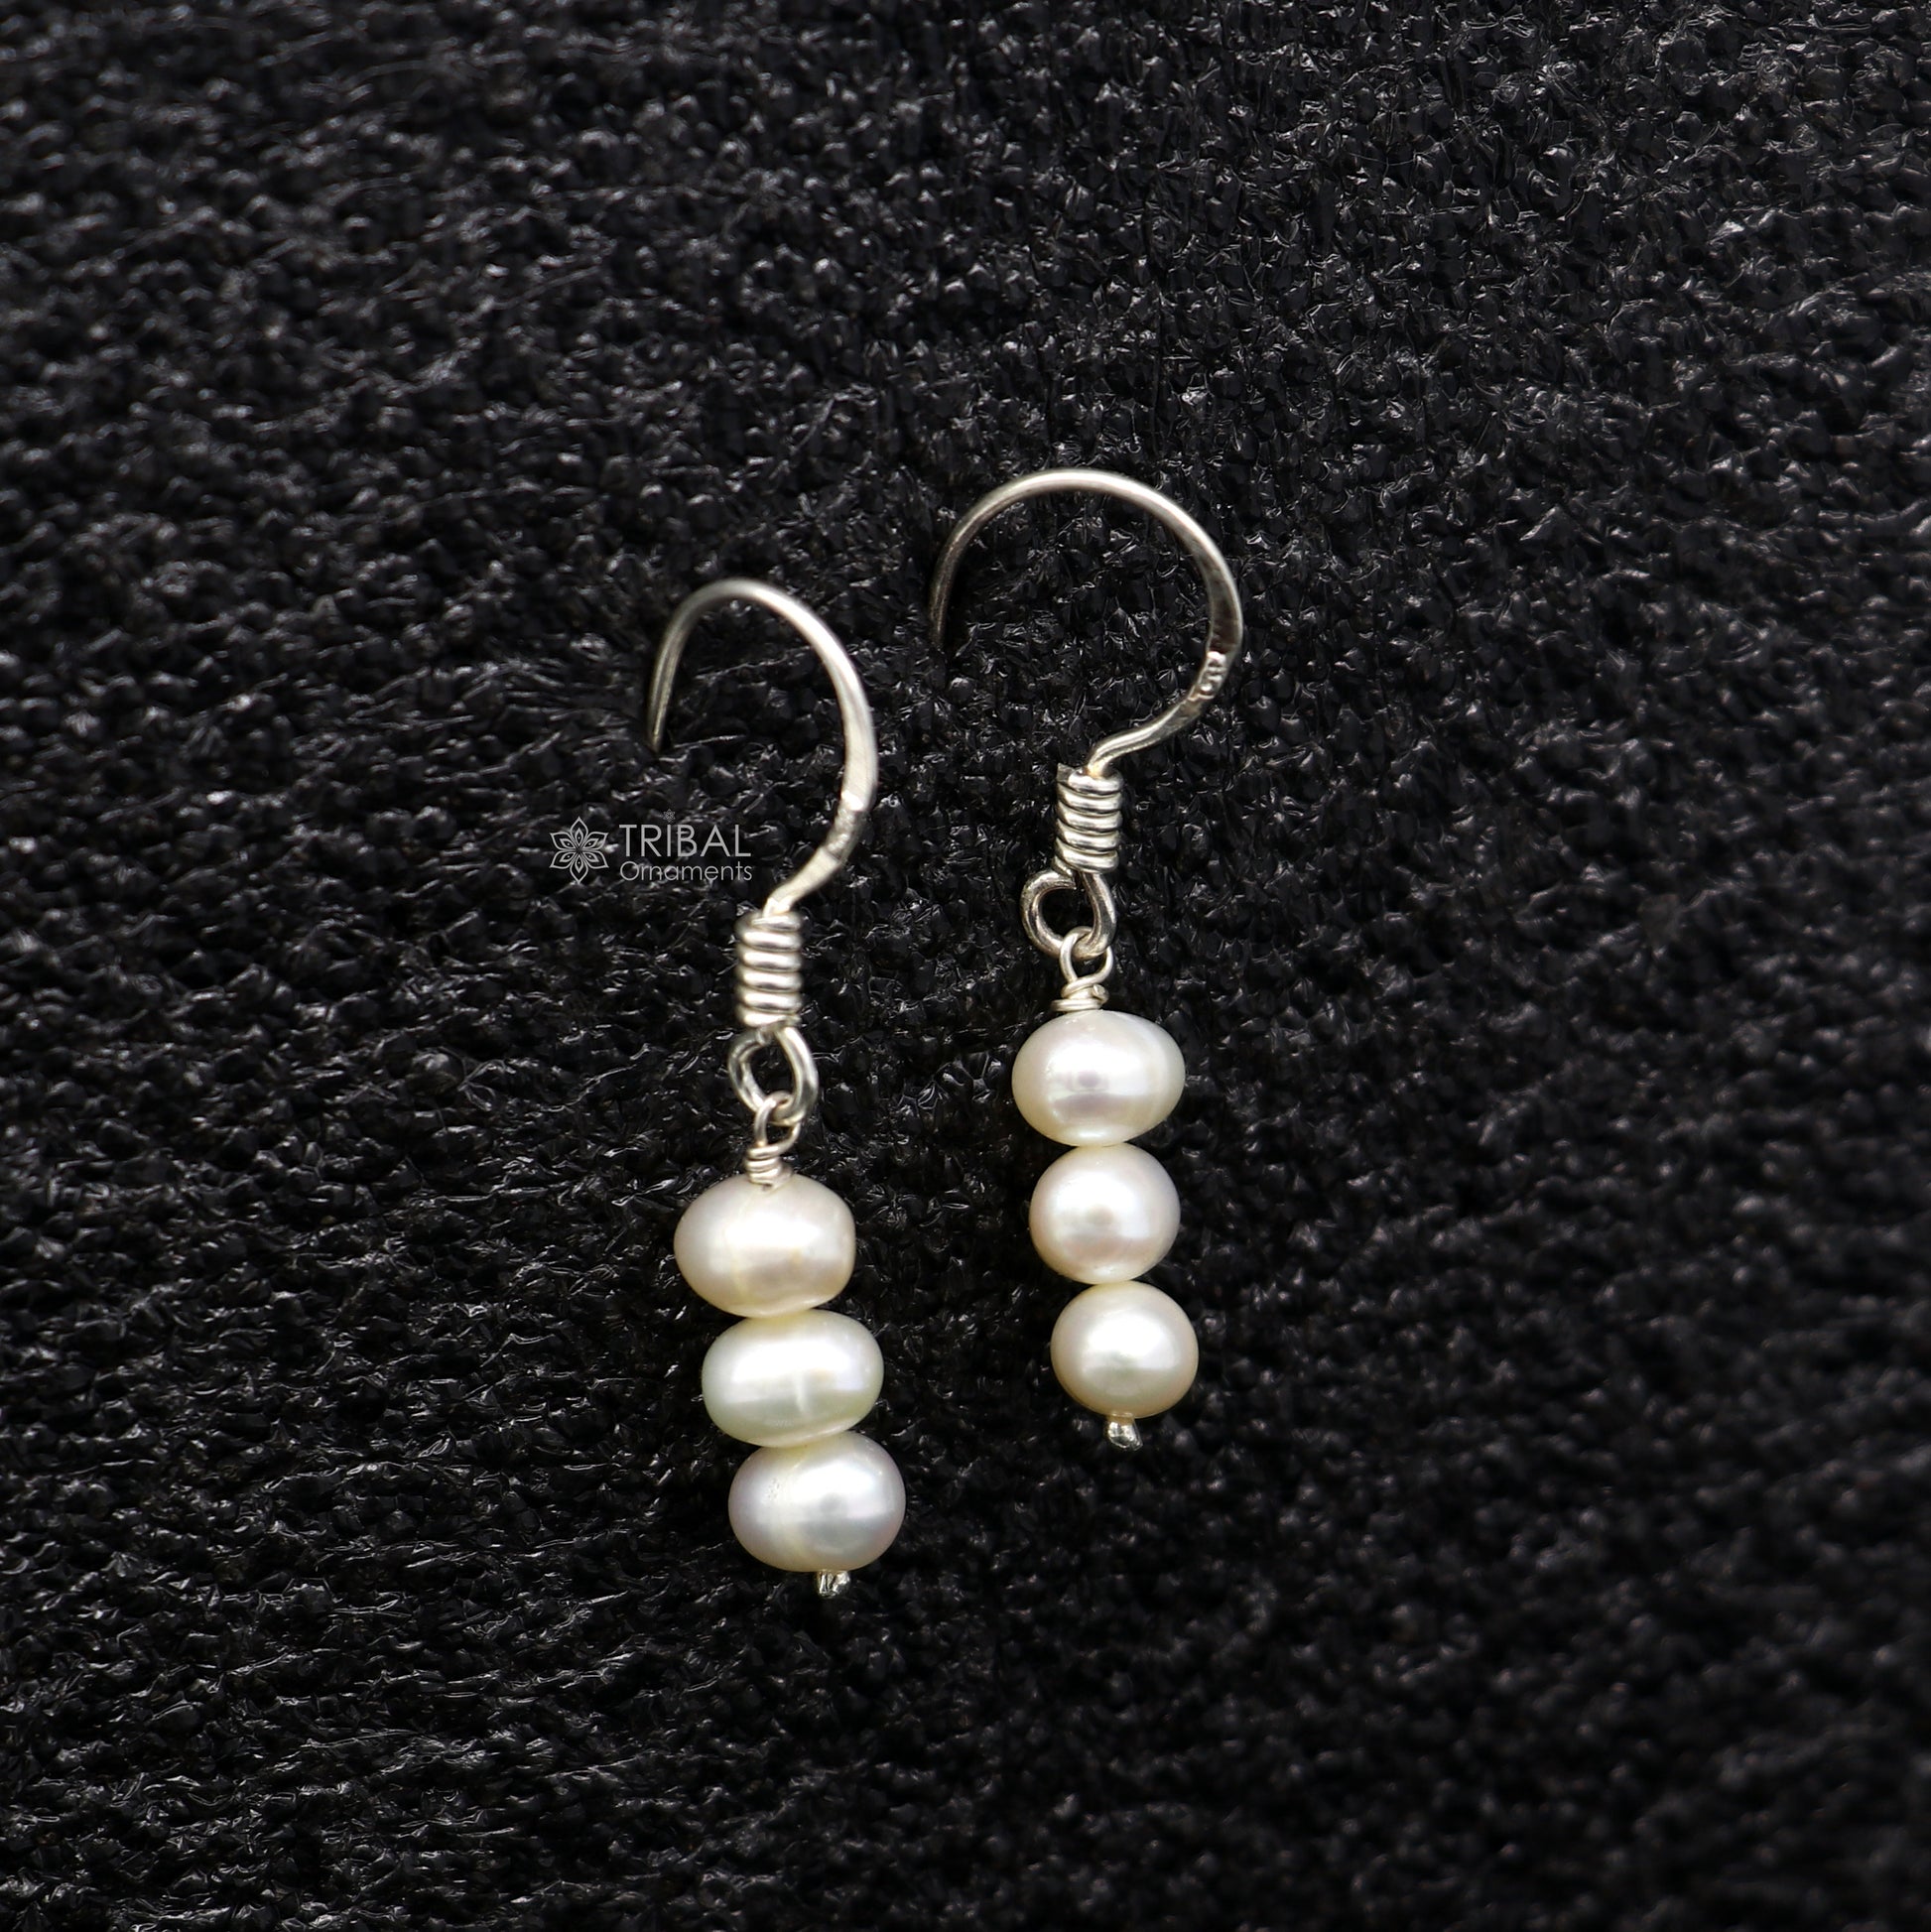 Unique 925 Sterling silver handmade fabulous Hoops earrings with gorgeous pearls stone stylish light weight delicate jewelry  s1208 - TRIBAL ORNAMENTS